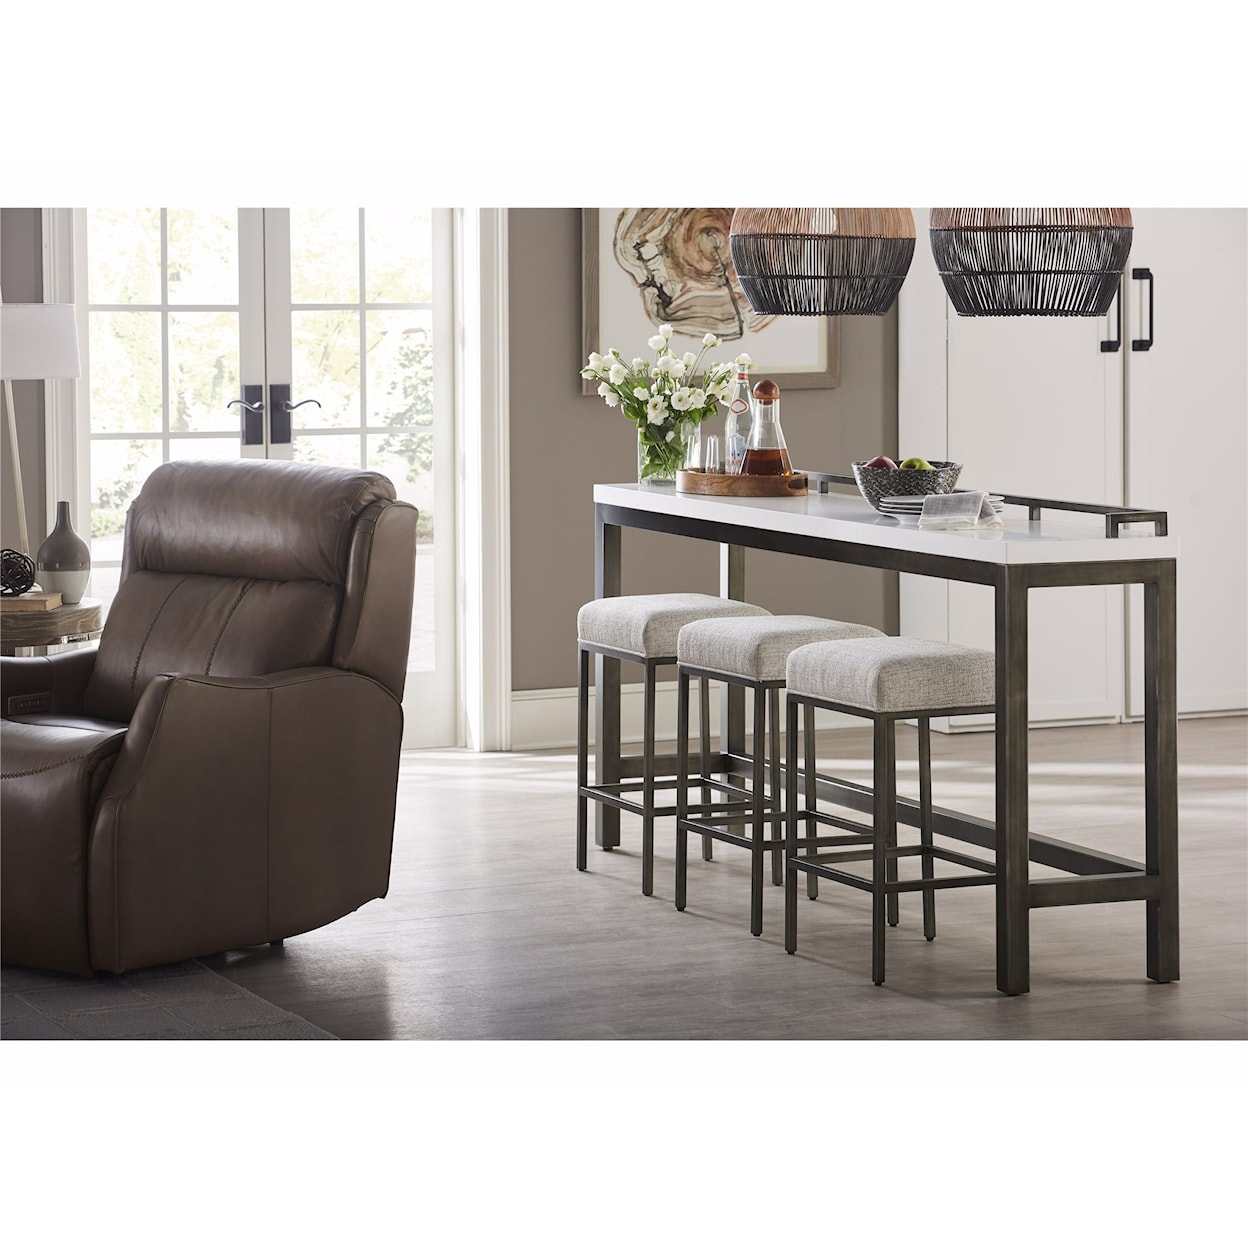 Universal Curated Table with Stools